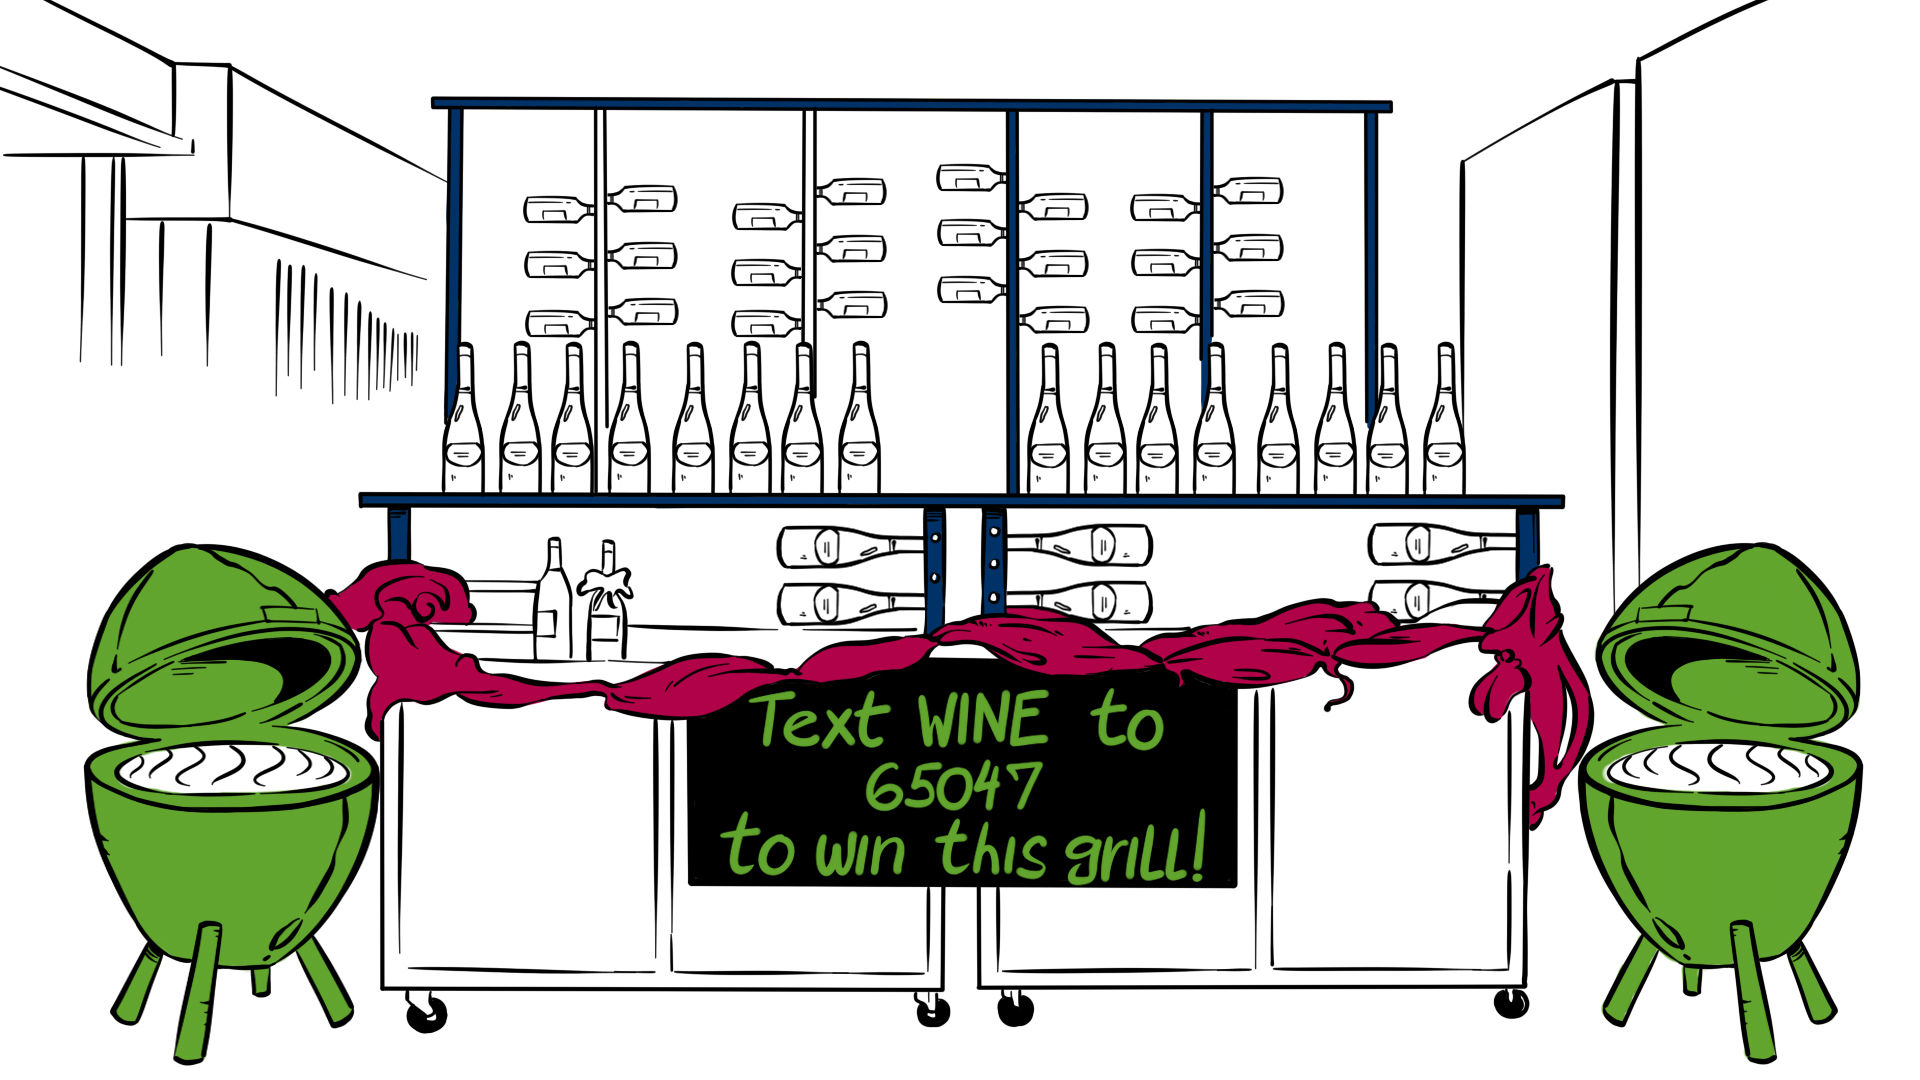 Kendall Jackson Wines Offered Trendy Prize in Mobile Text-to-Win Sweepstakes